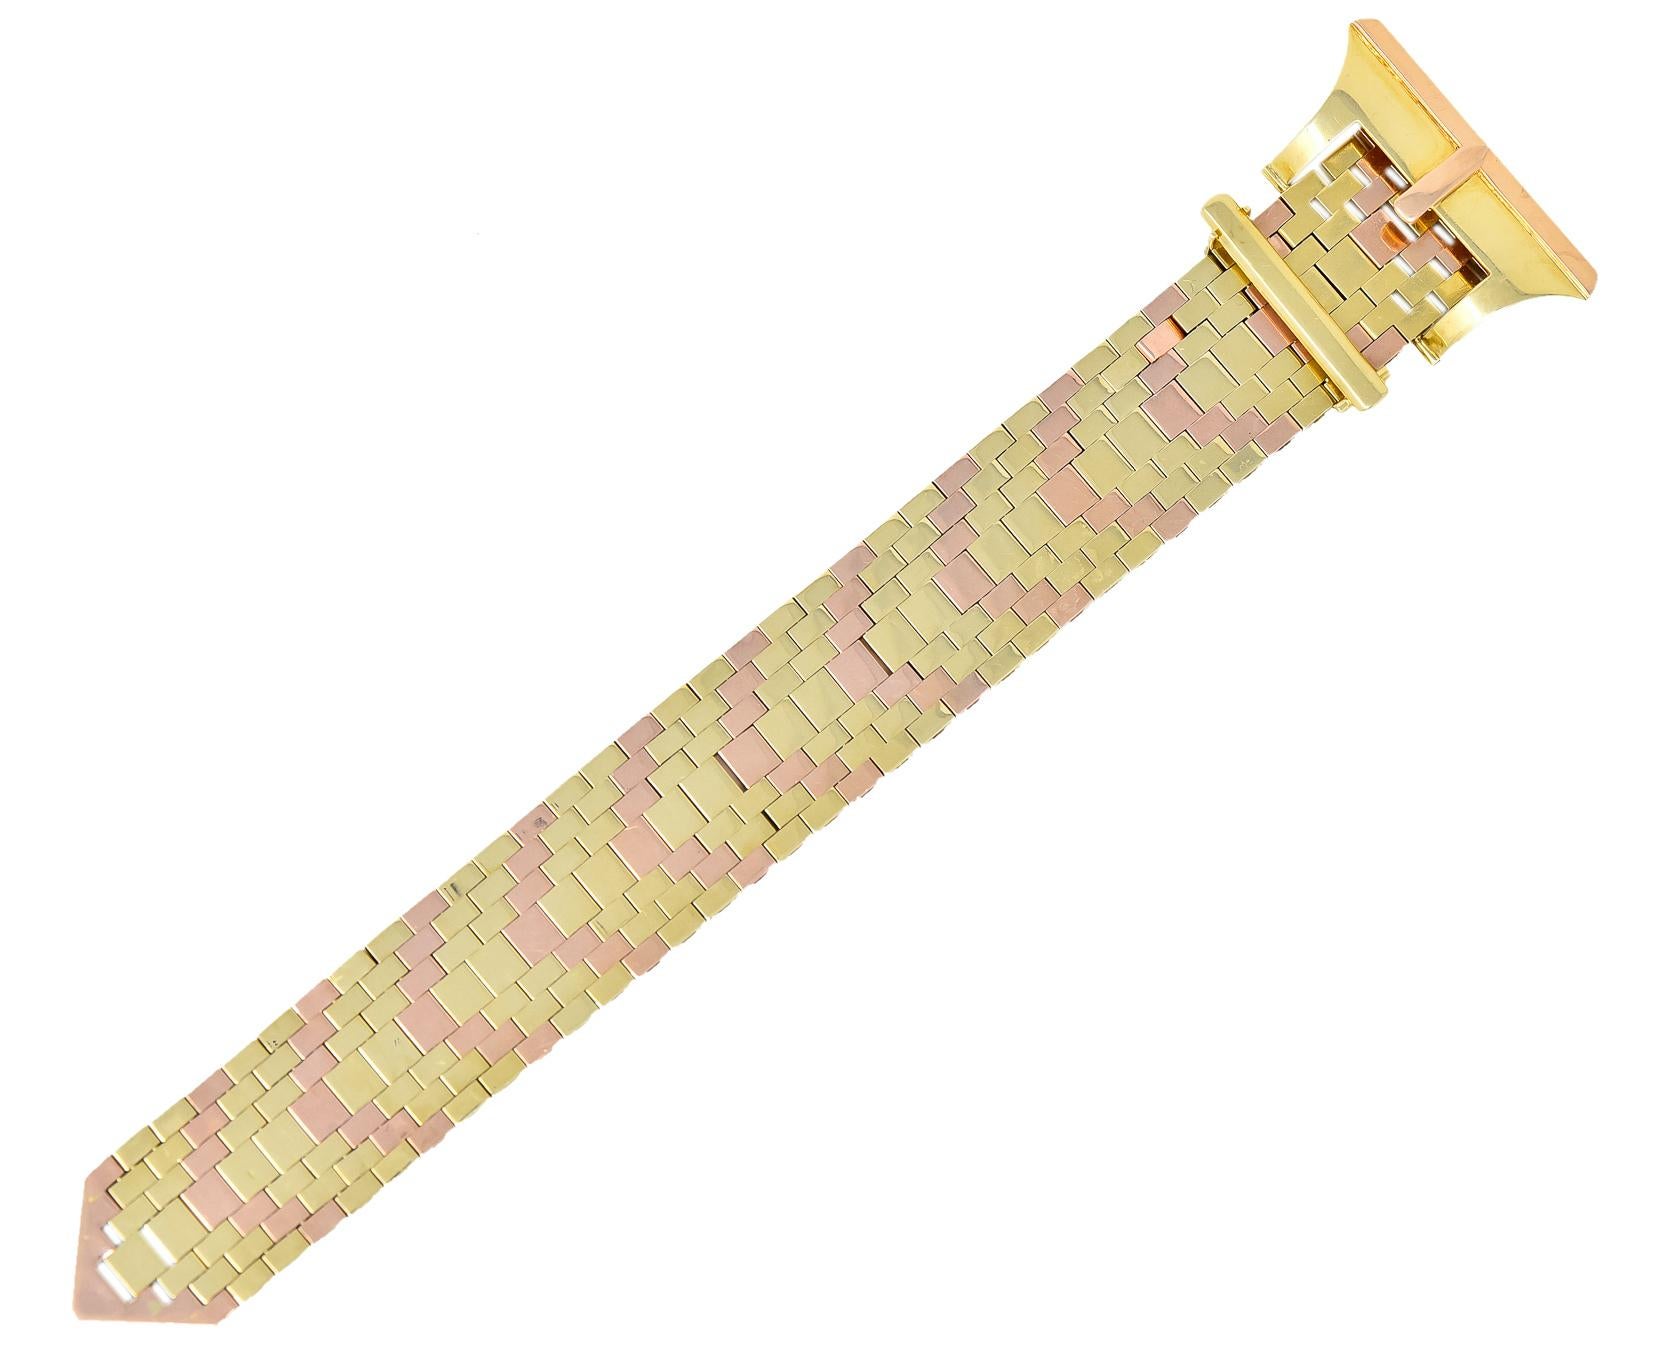 Bracelet is designed as a malleable strap of intermingled links of rose and yellow gold

With a stylized buckle of high polished gold accented by a rose gold border

Completed by locking hinged closure 

With maker's mark and Netherland assay